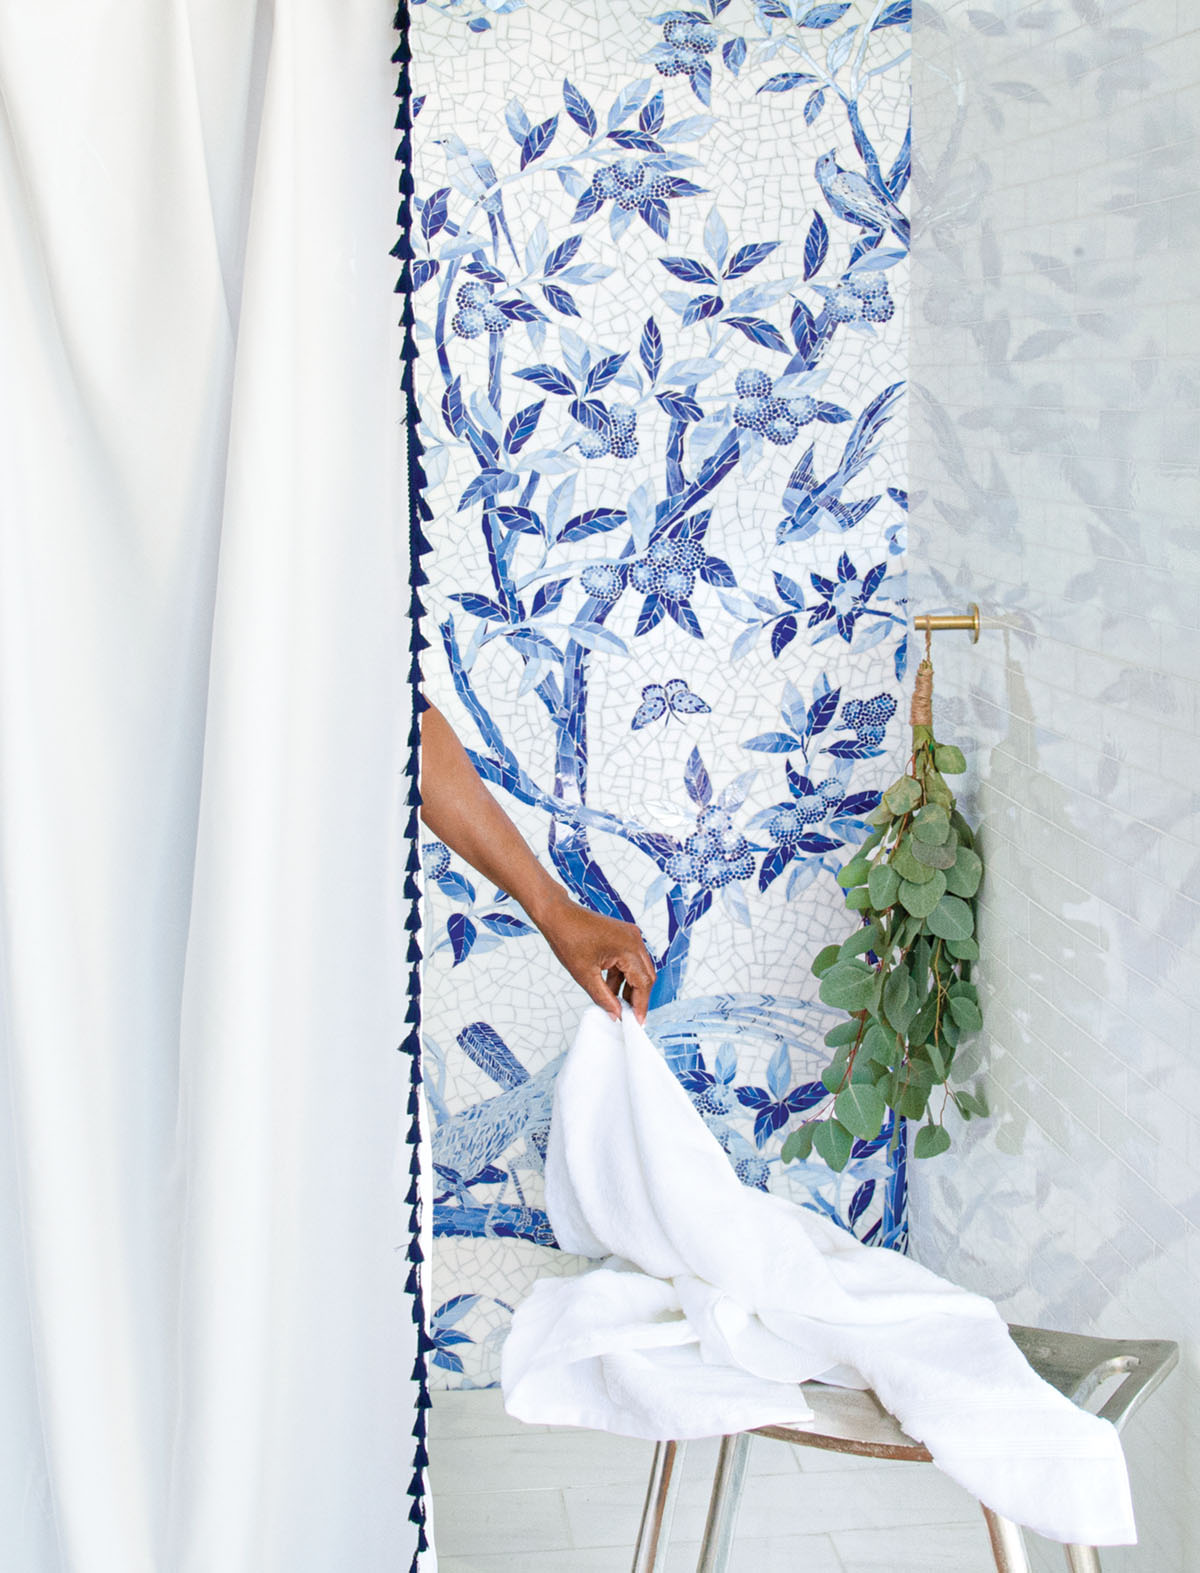 shower wall titled with a blue-and-white mosaic